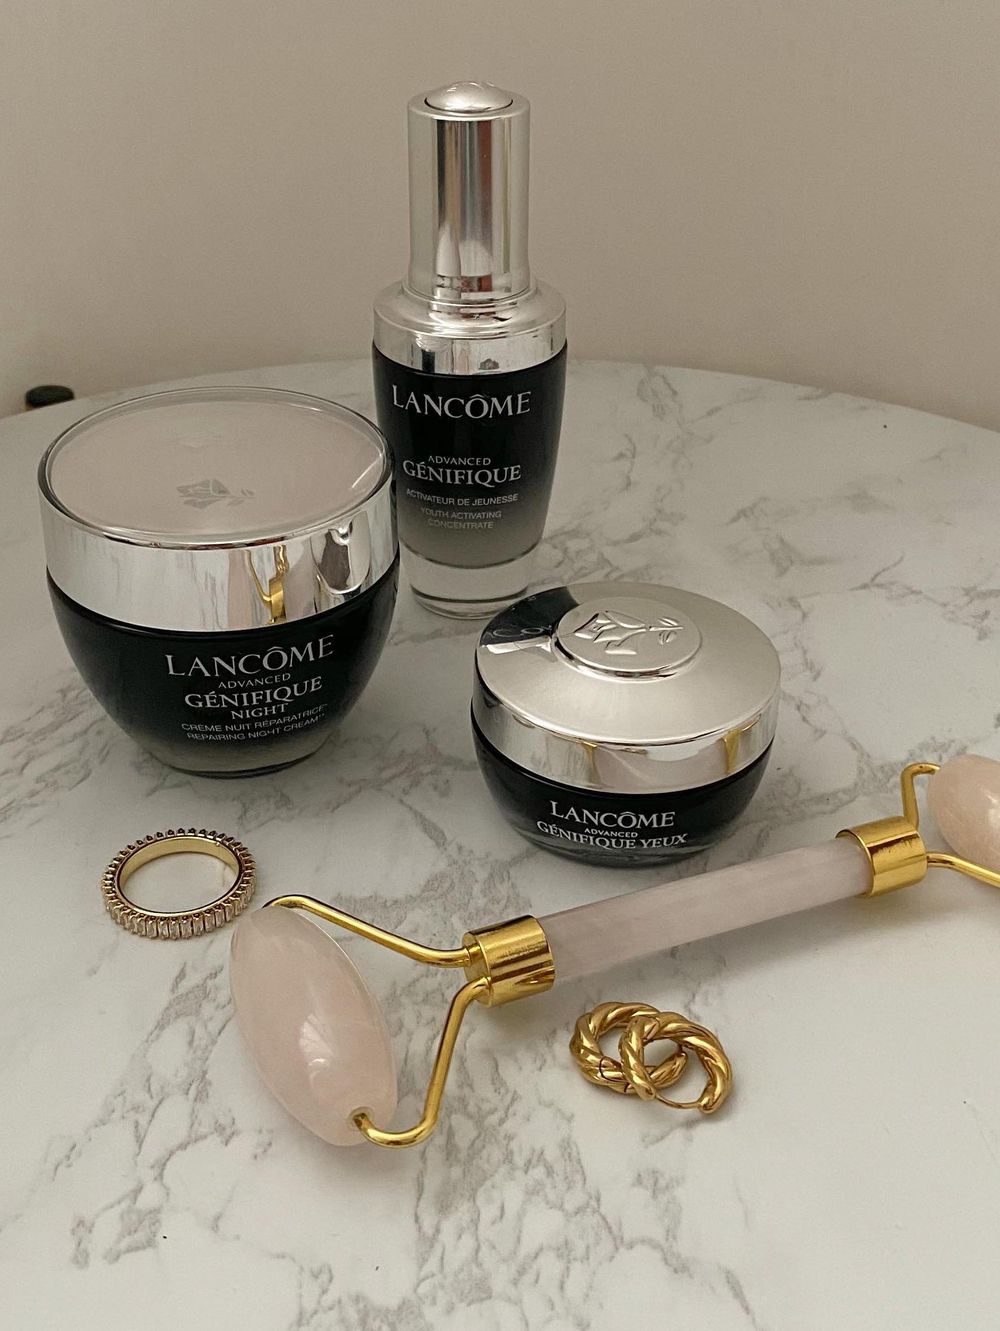 Lancôme Skincare Review: Is the Brand Worth It?